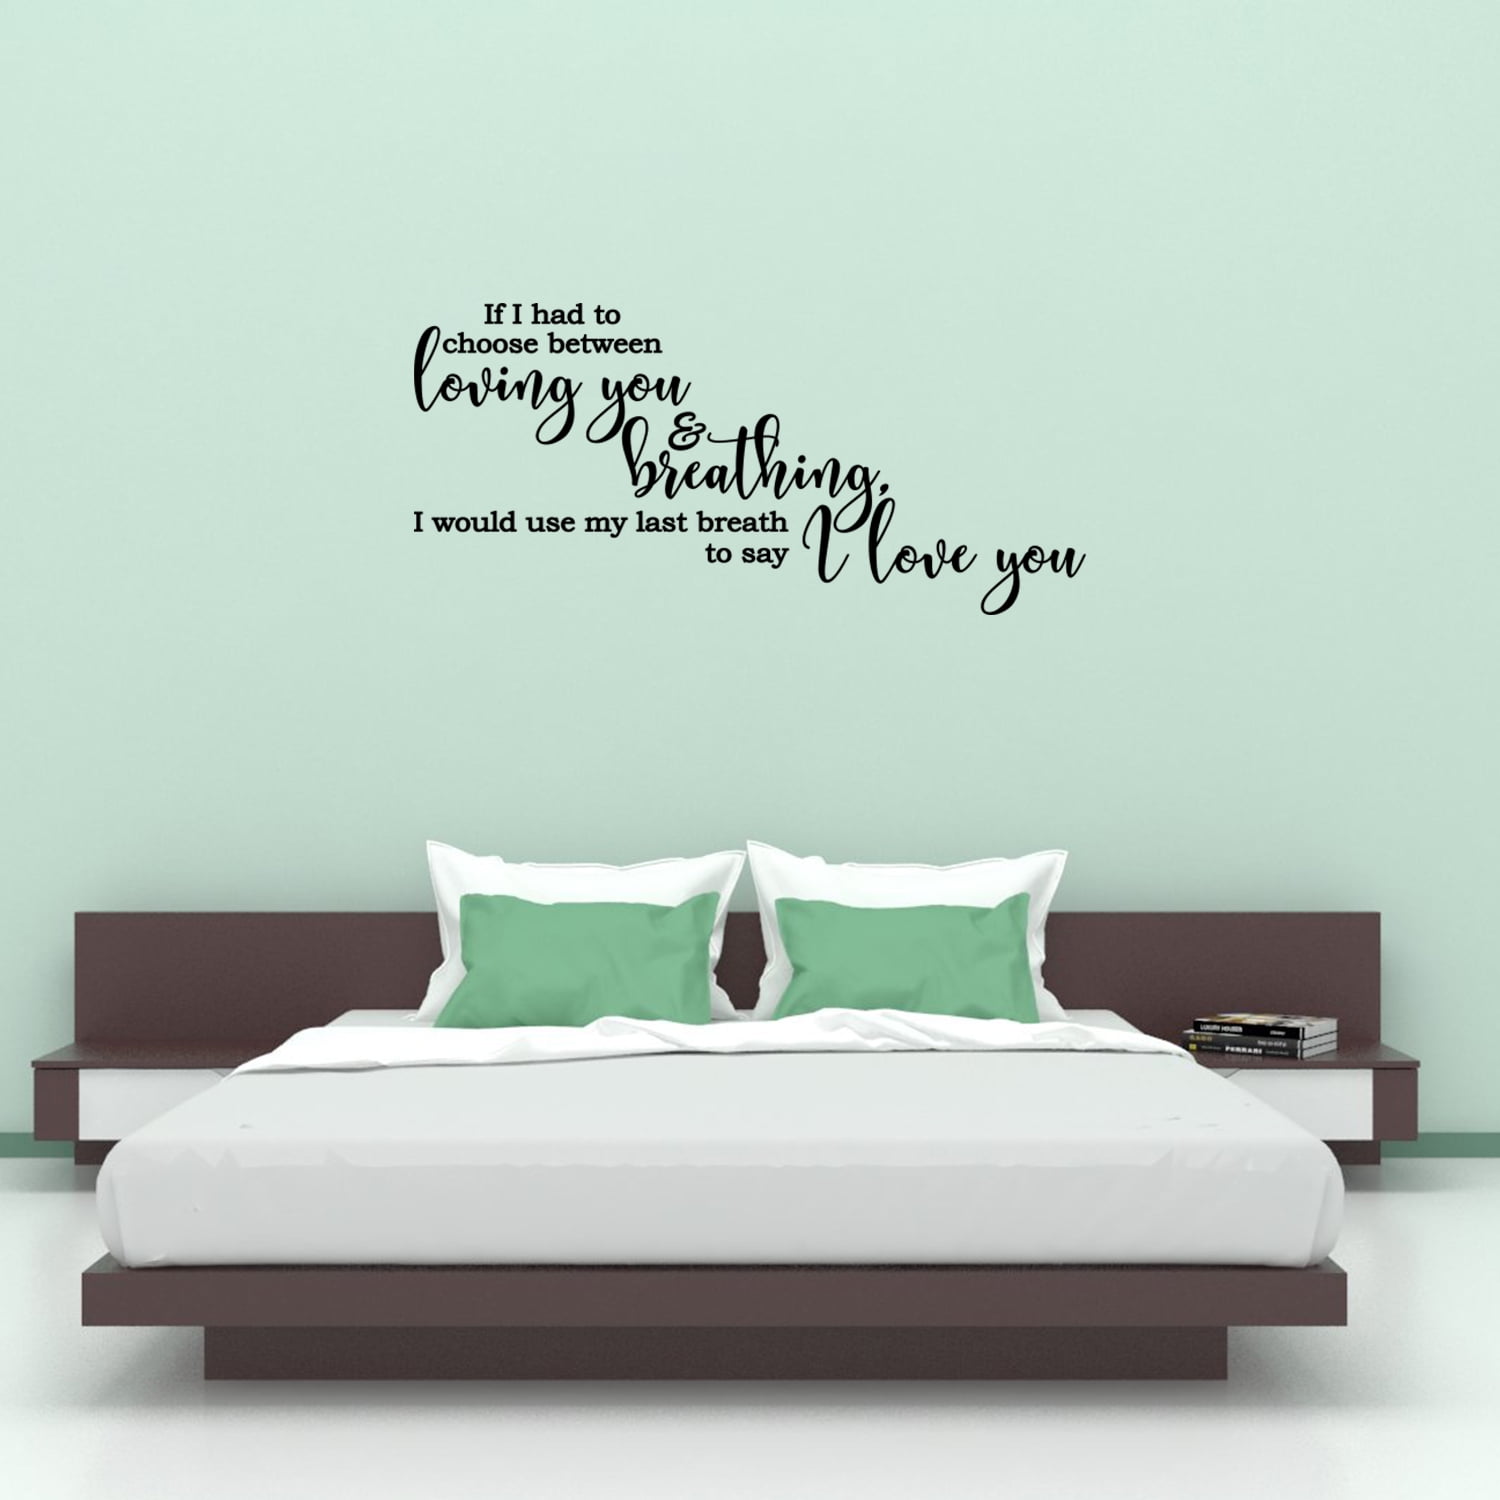 Details about   Vinyl Lettering Wall Art My Thoughtful Wall Decals CHOICE Catch Breath OR Life